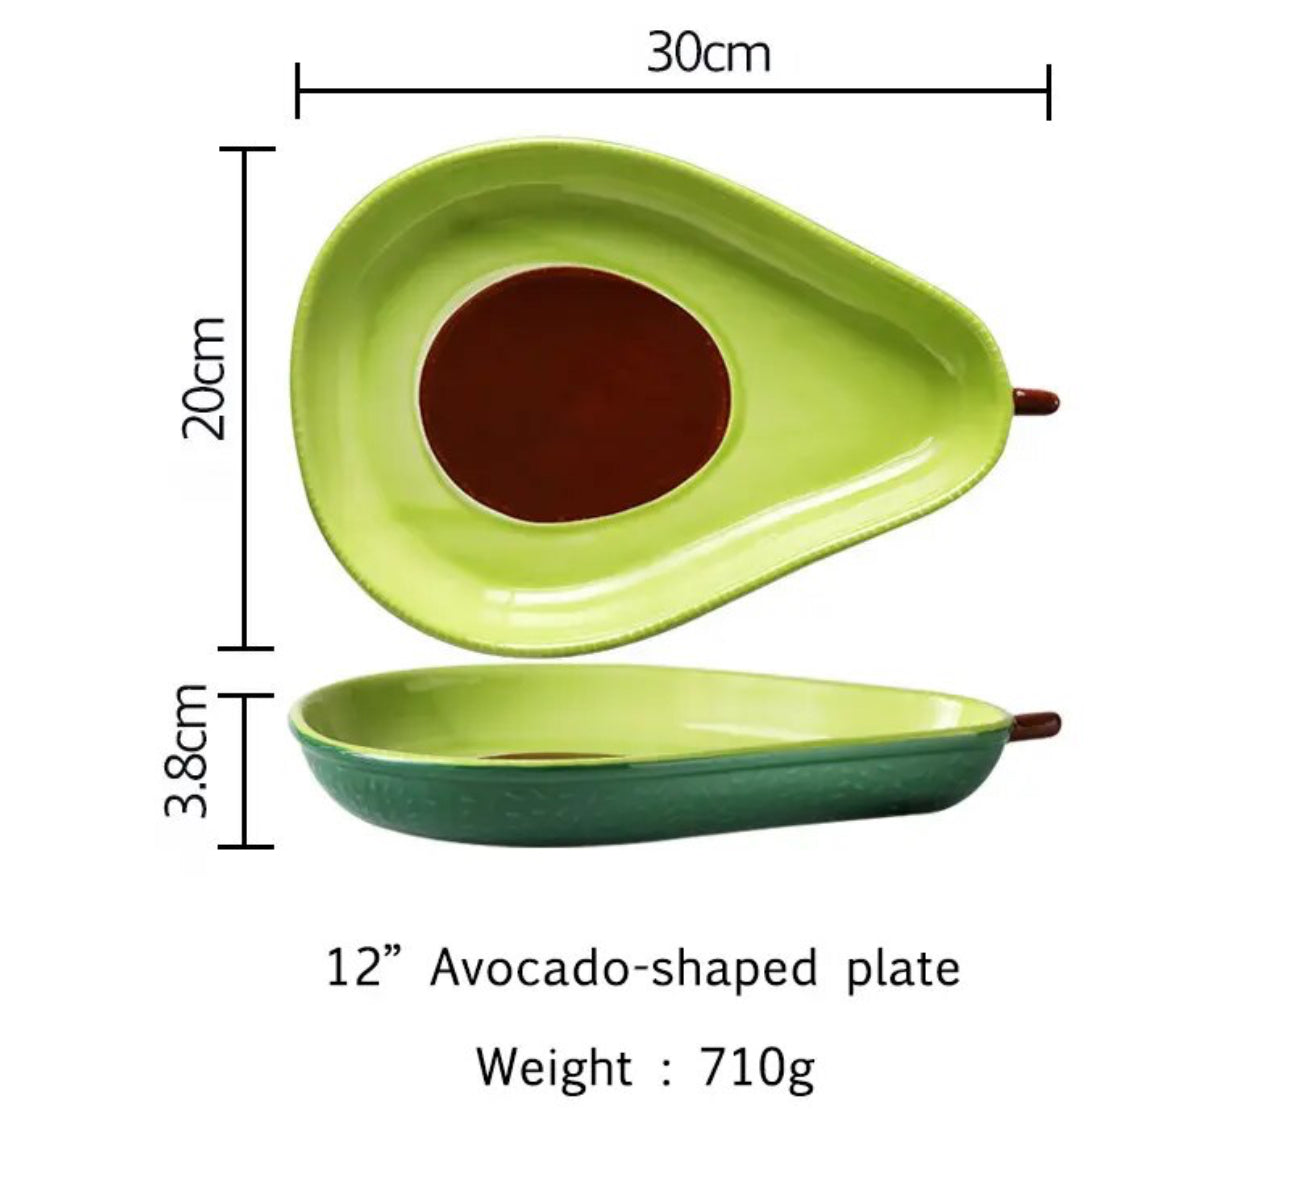 The Avocado Dishes